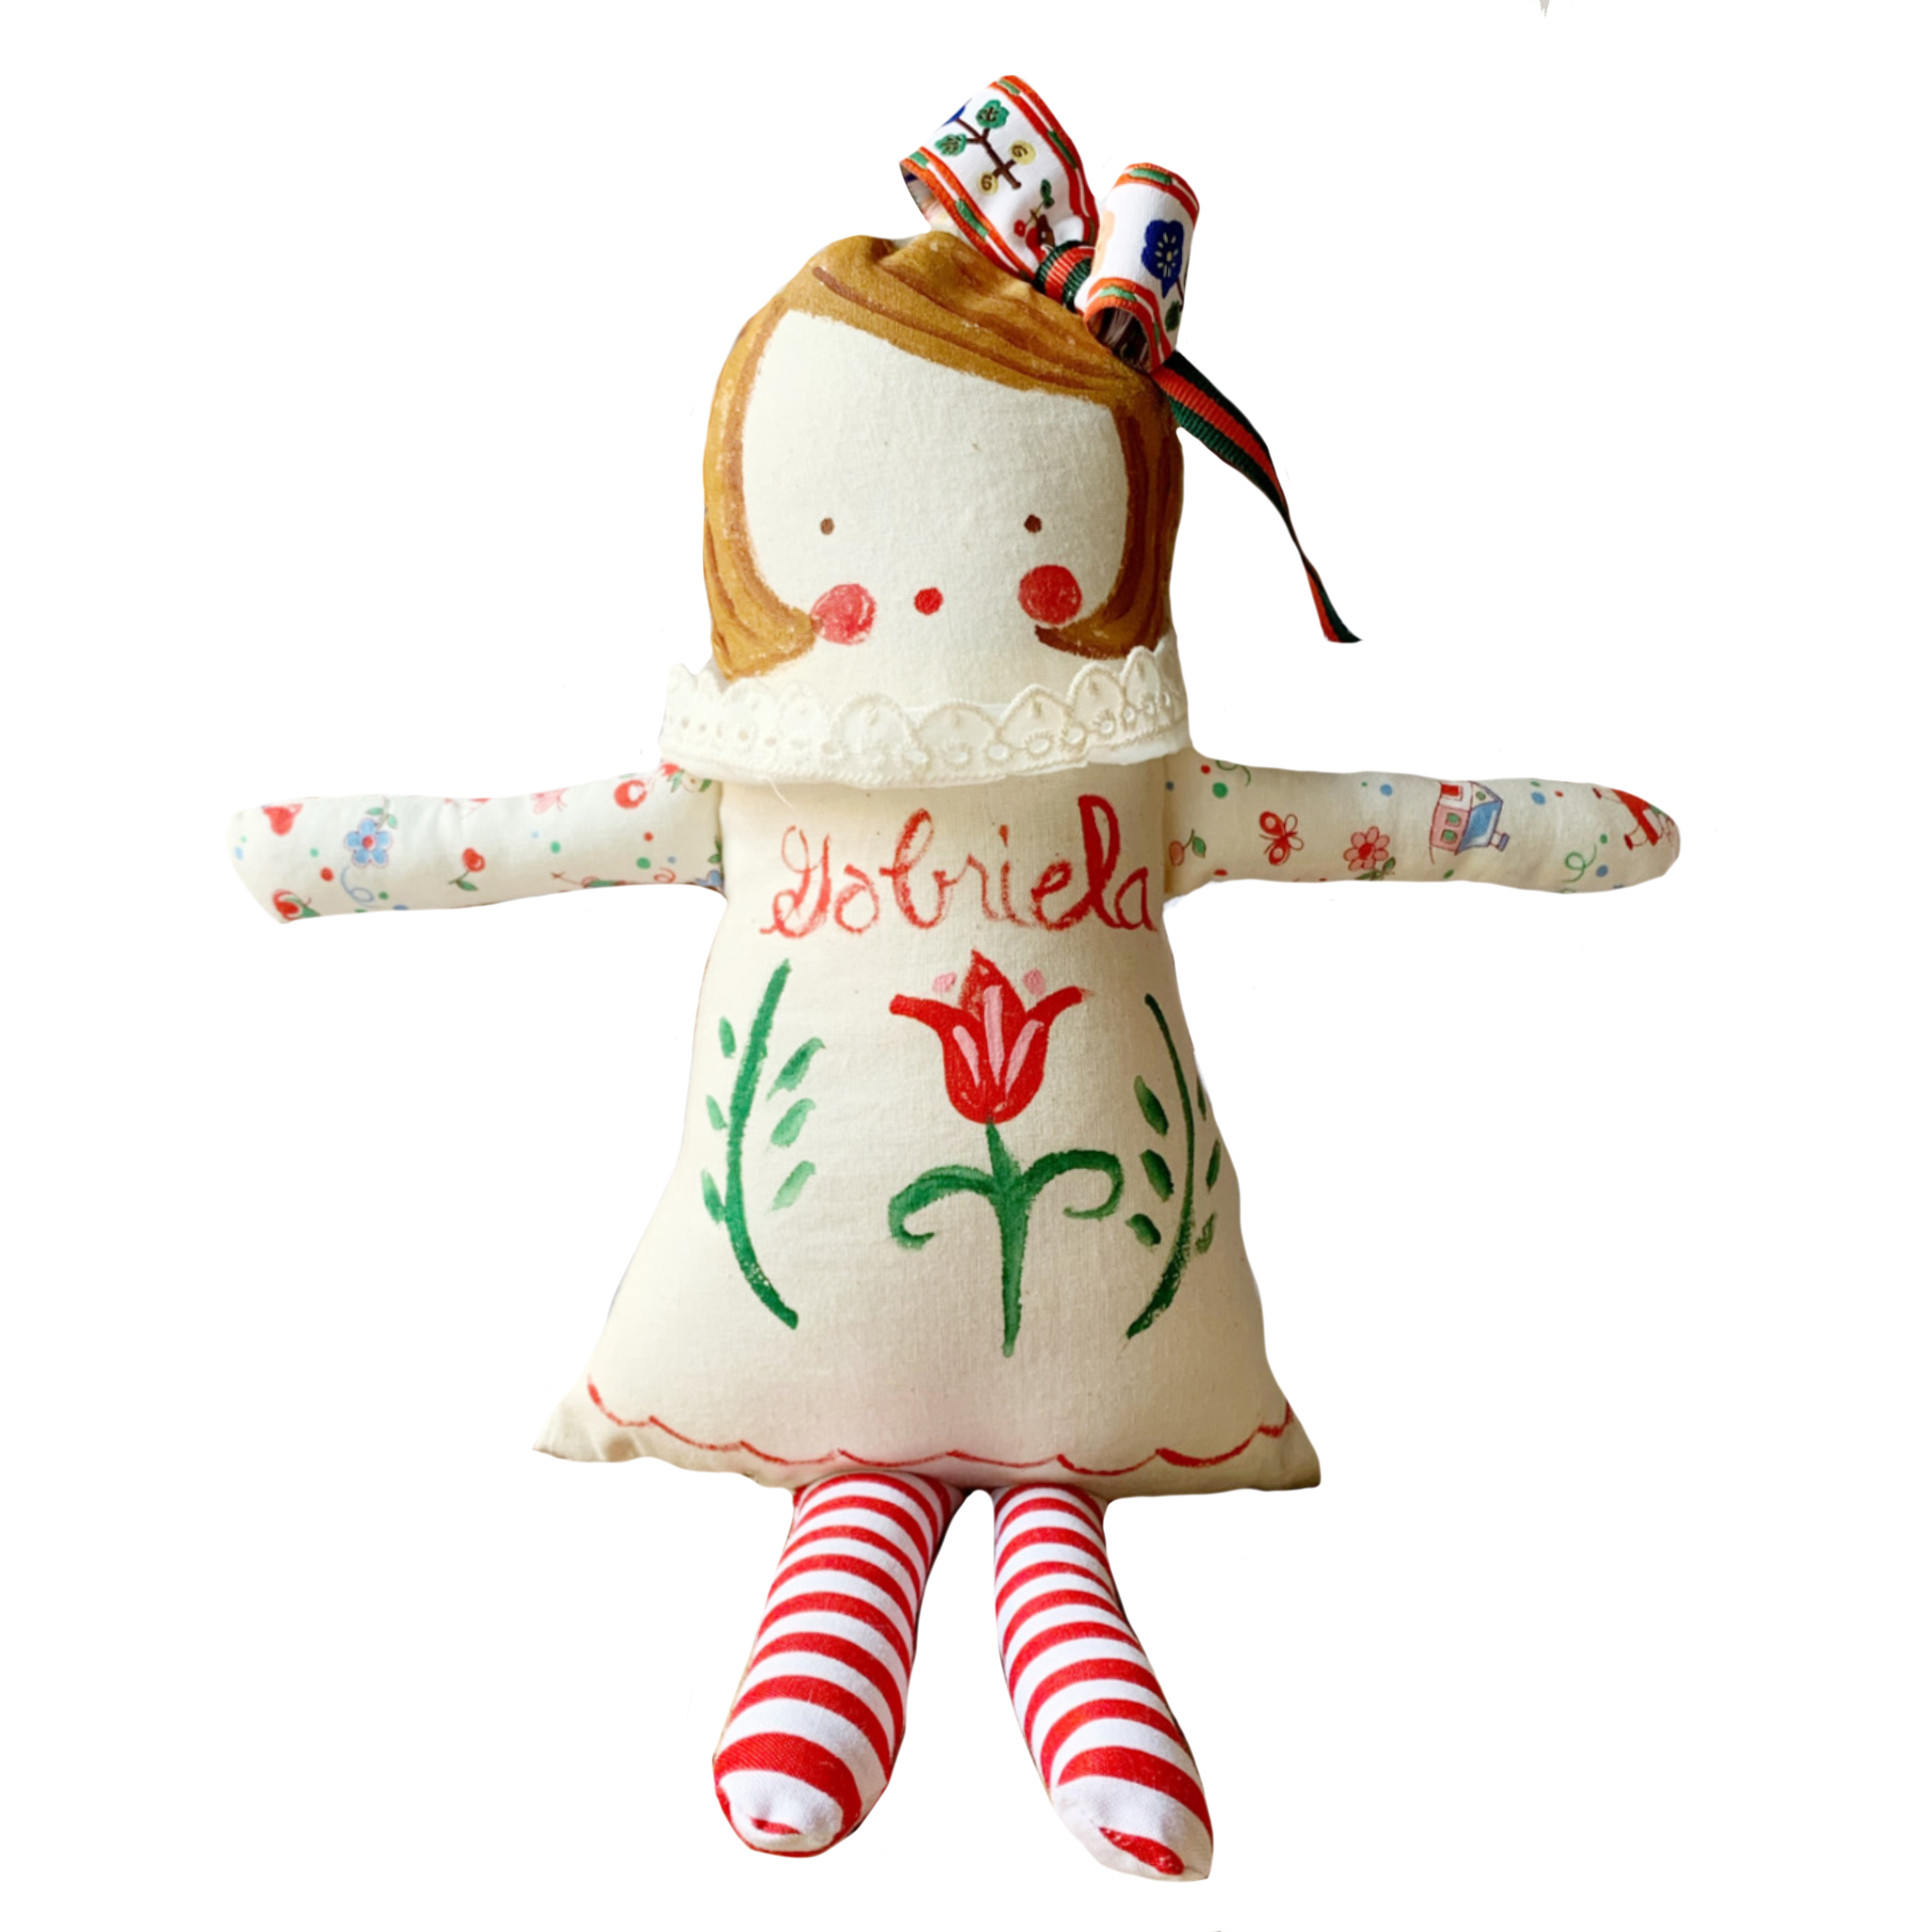 Personalized Doll - Tricia Lowenfield Design